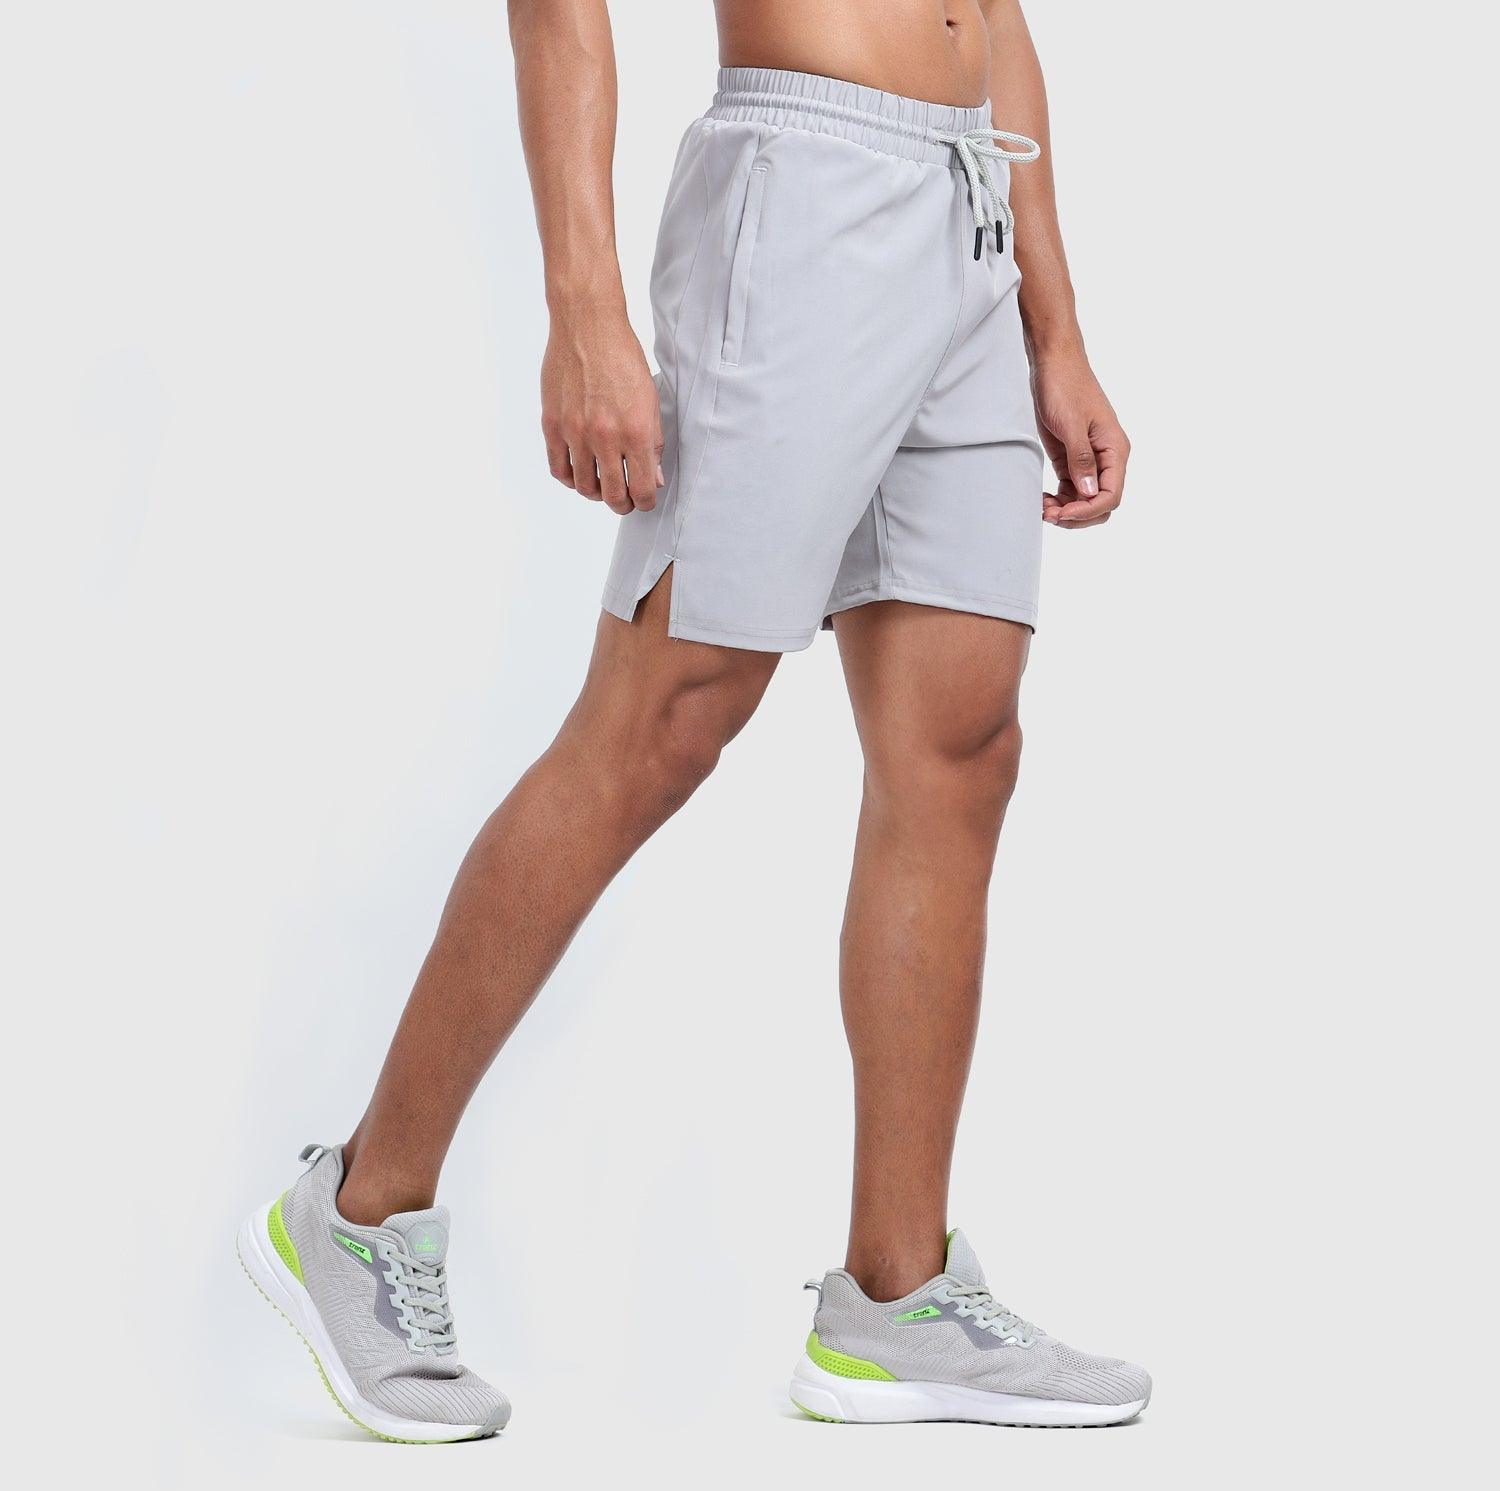 Denmonk's fashionable Coastline Comfort light grey shorts for men will boost your level of gym fitness.